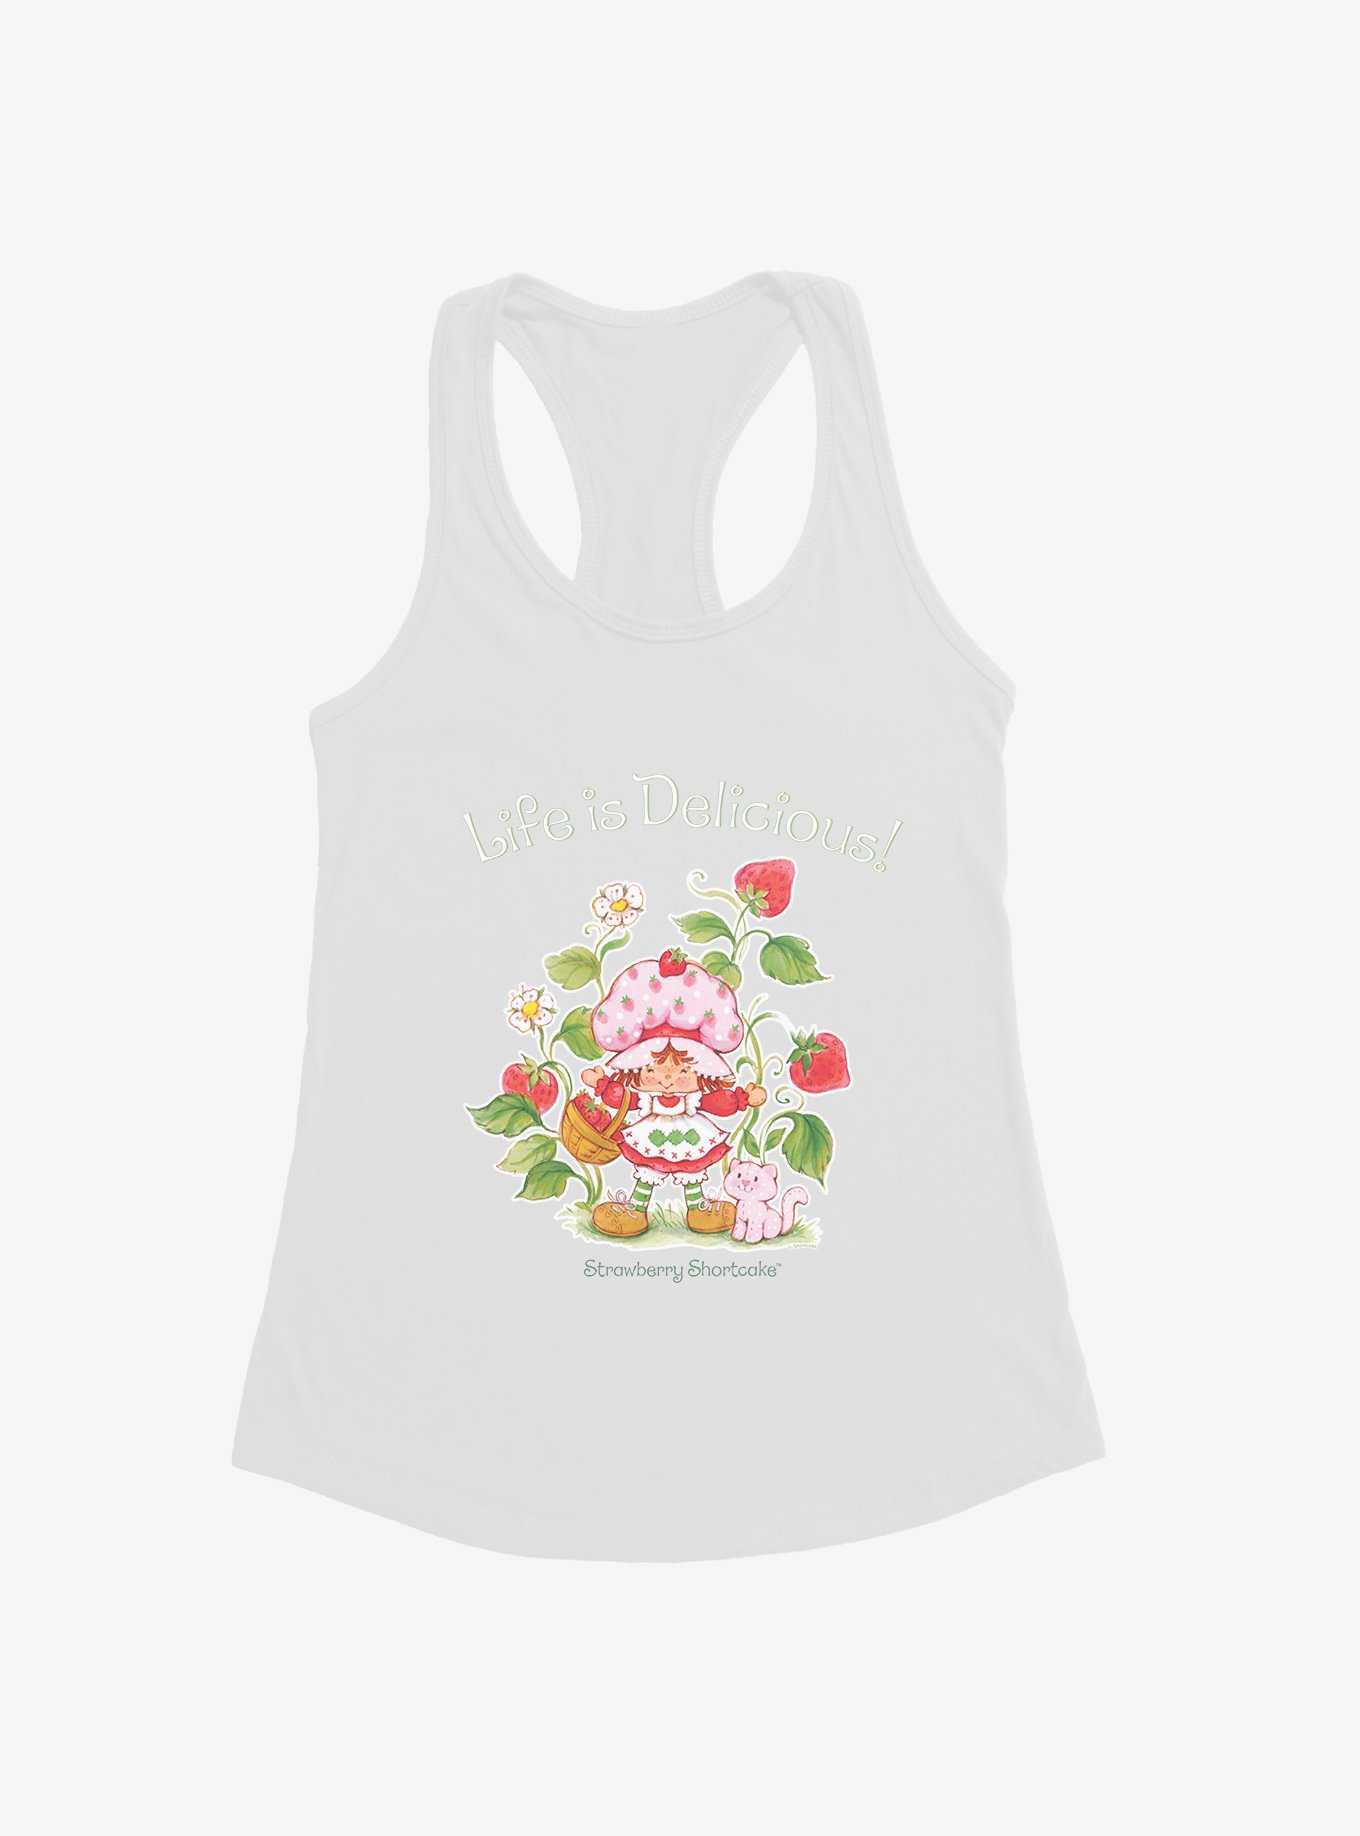 Strawberry Shortcake Life Is Delicious! Girls Tank, , hi-res